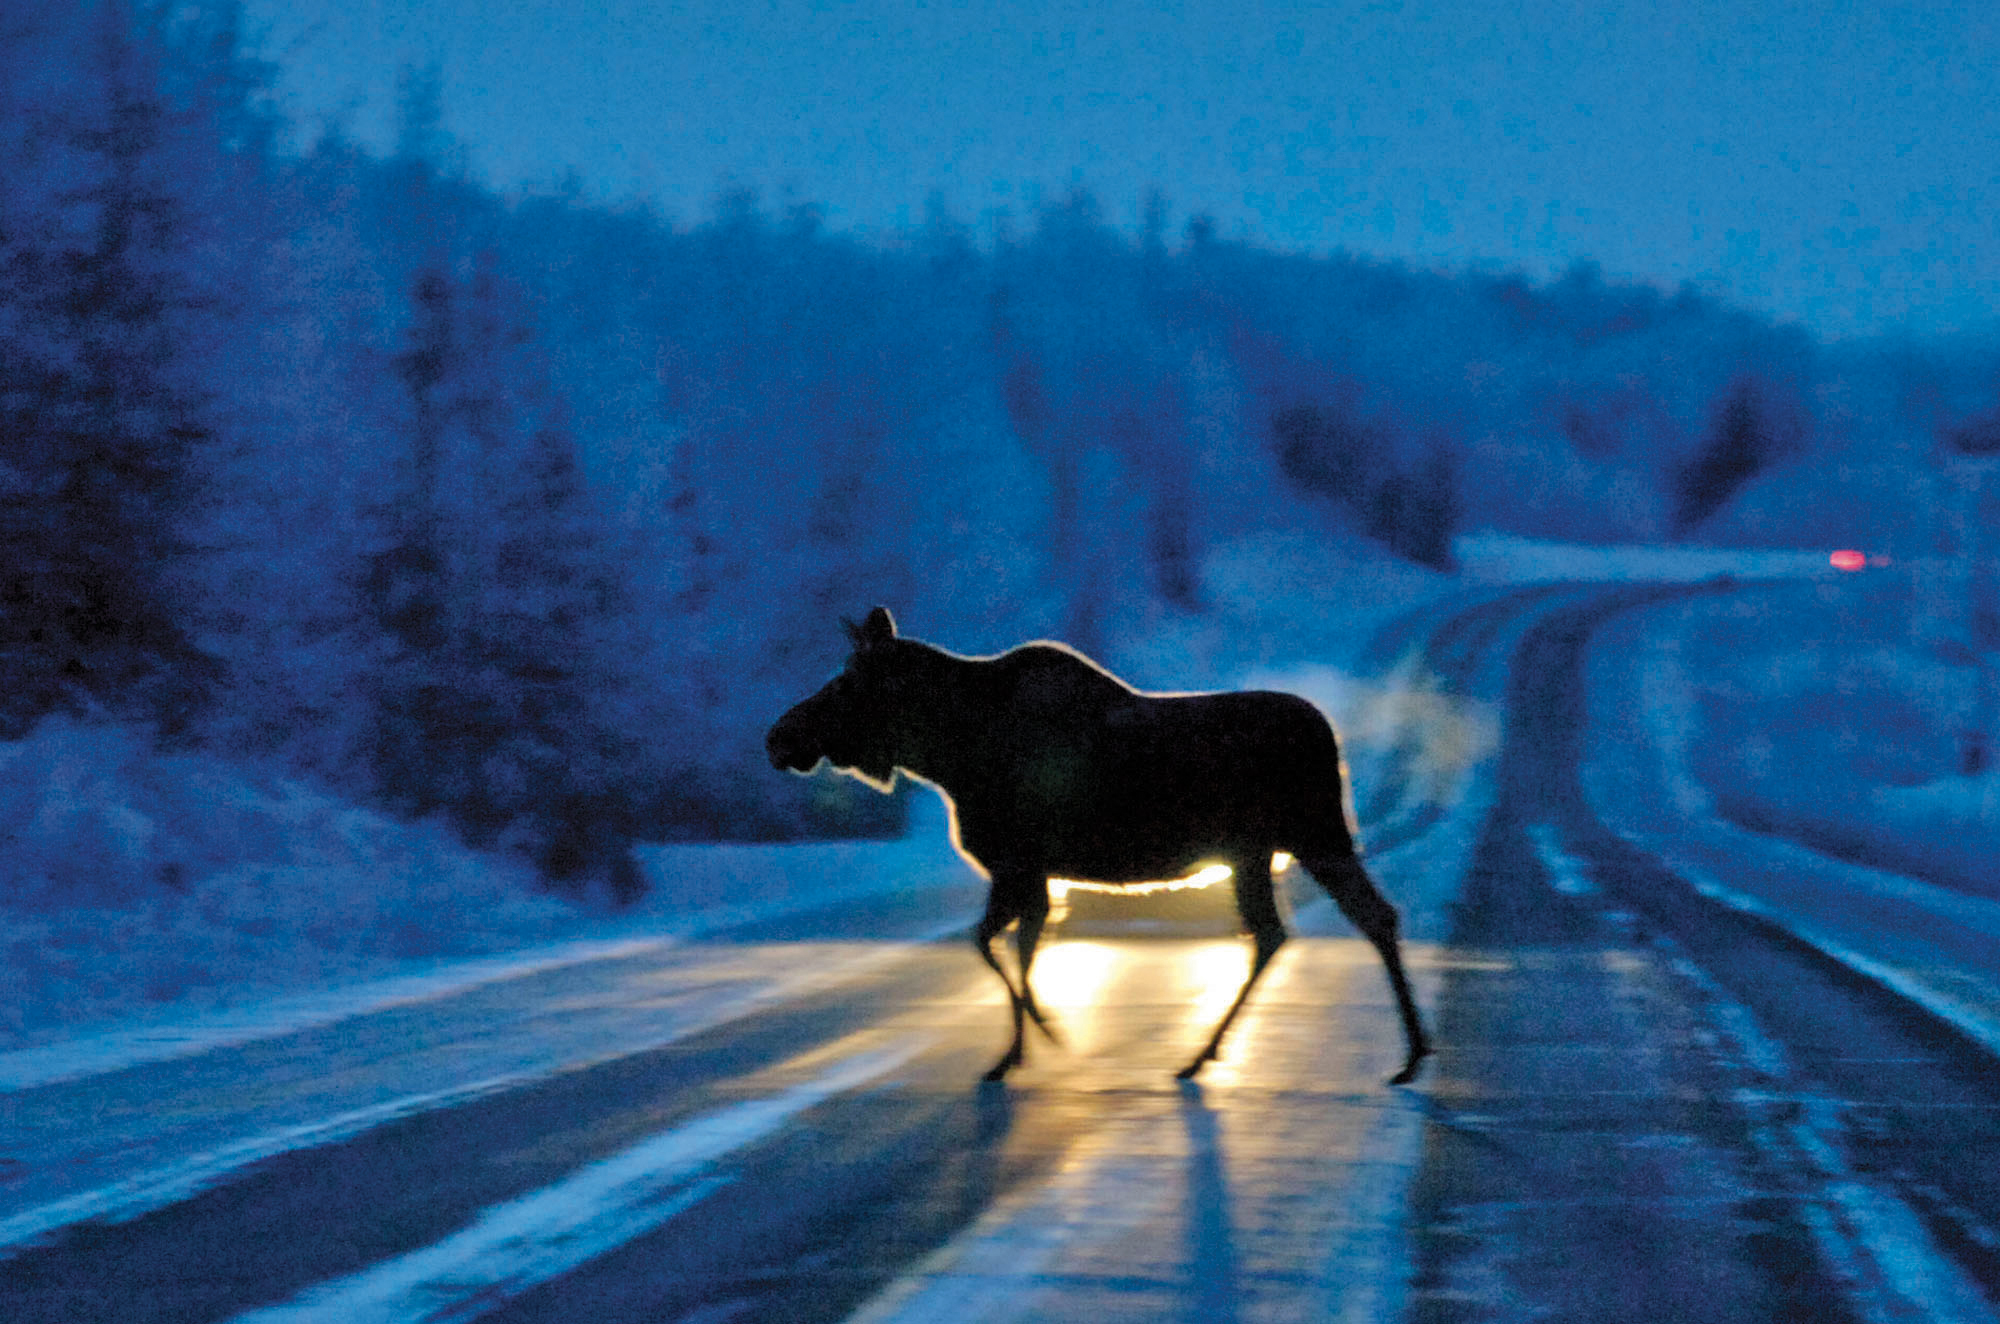 Game board authorizes cow, roadside hunts for parts of peninsula